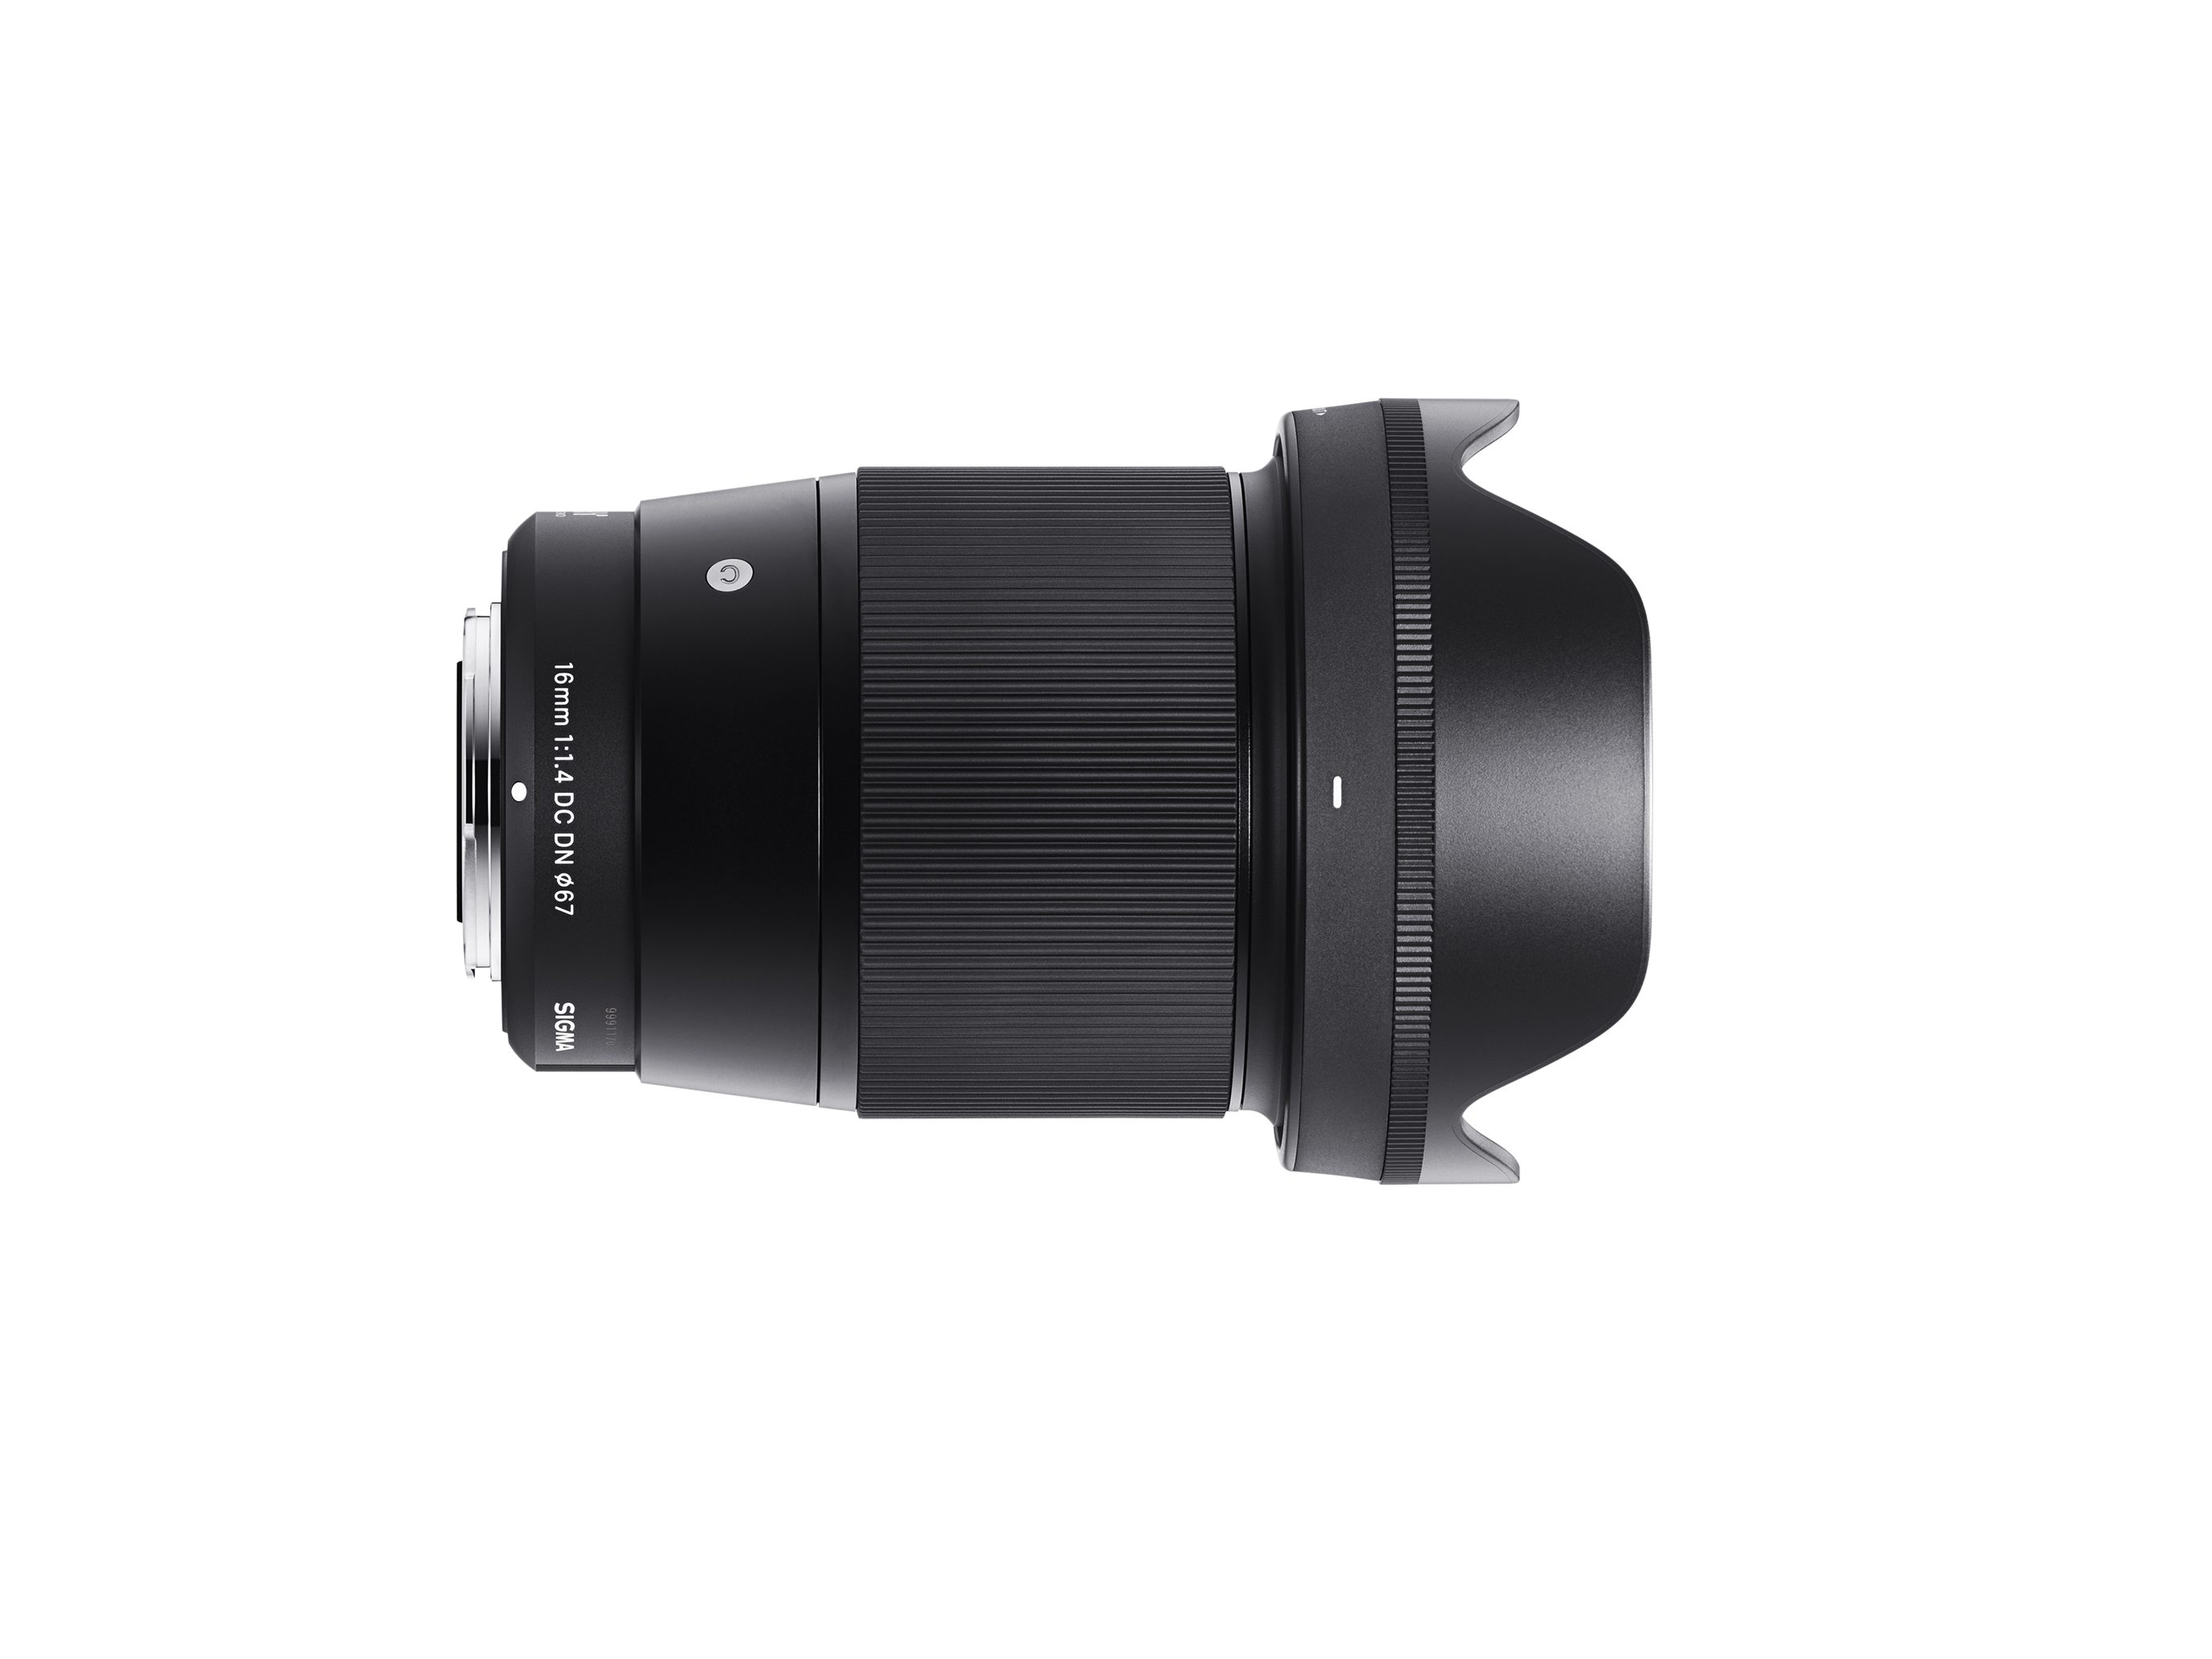 Sigma 16mm F1.4 DC DN Lens for Sony E and Micro Four Thirds mounts